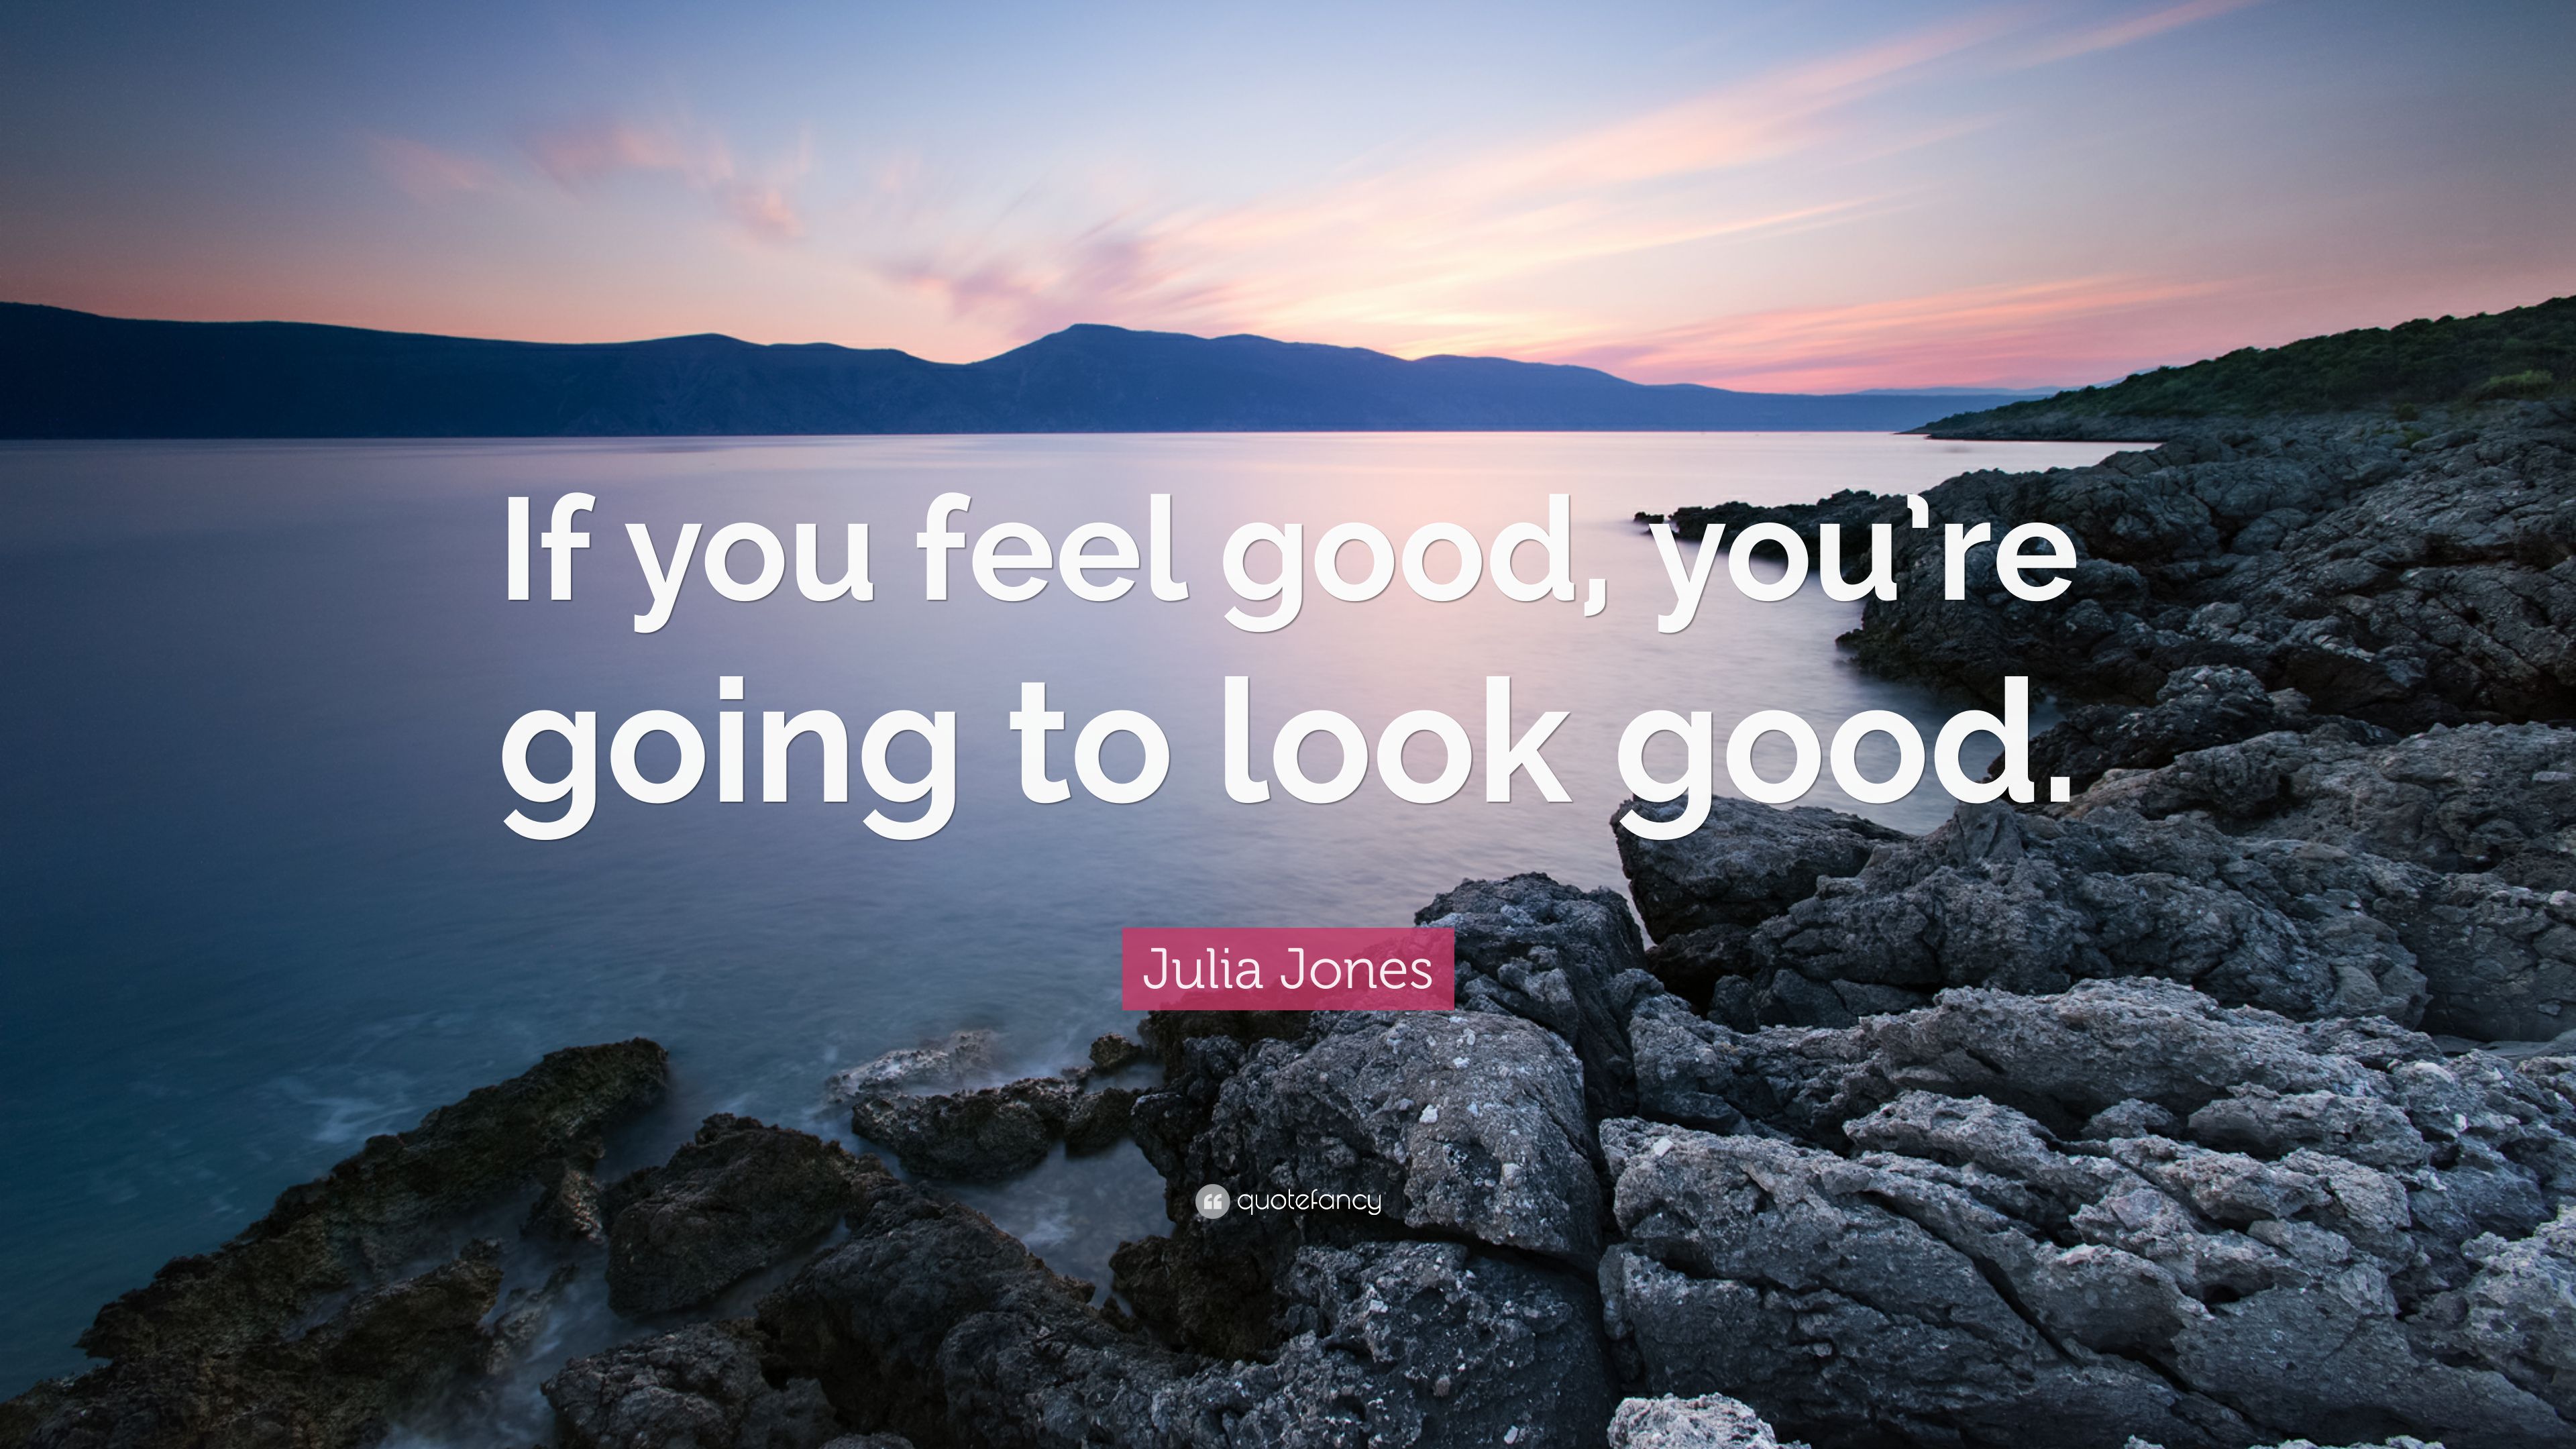 Julia Jones Quote: “If you feel good, you're going to look good